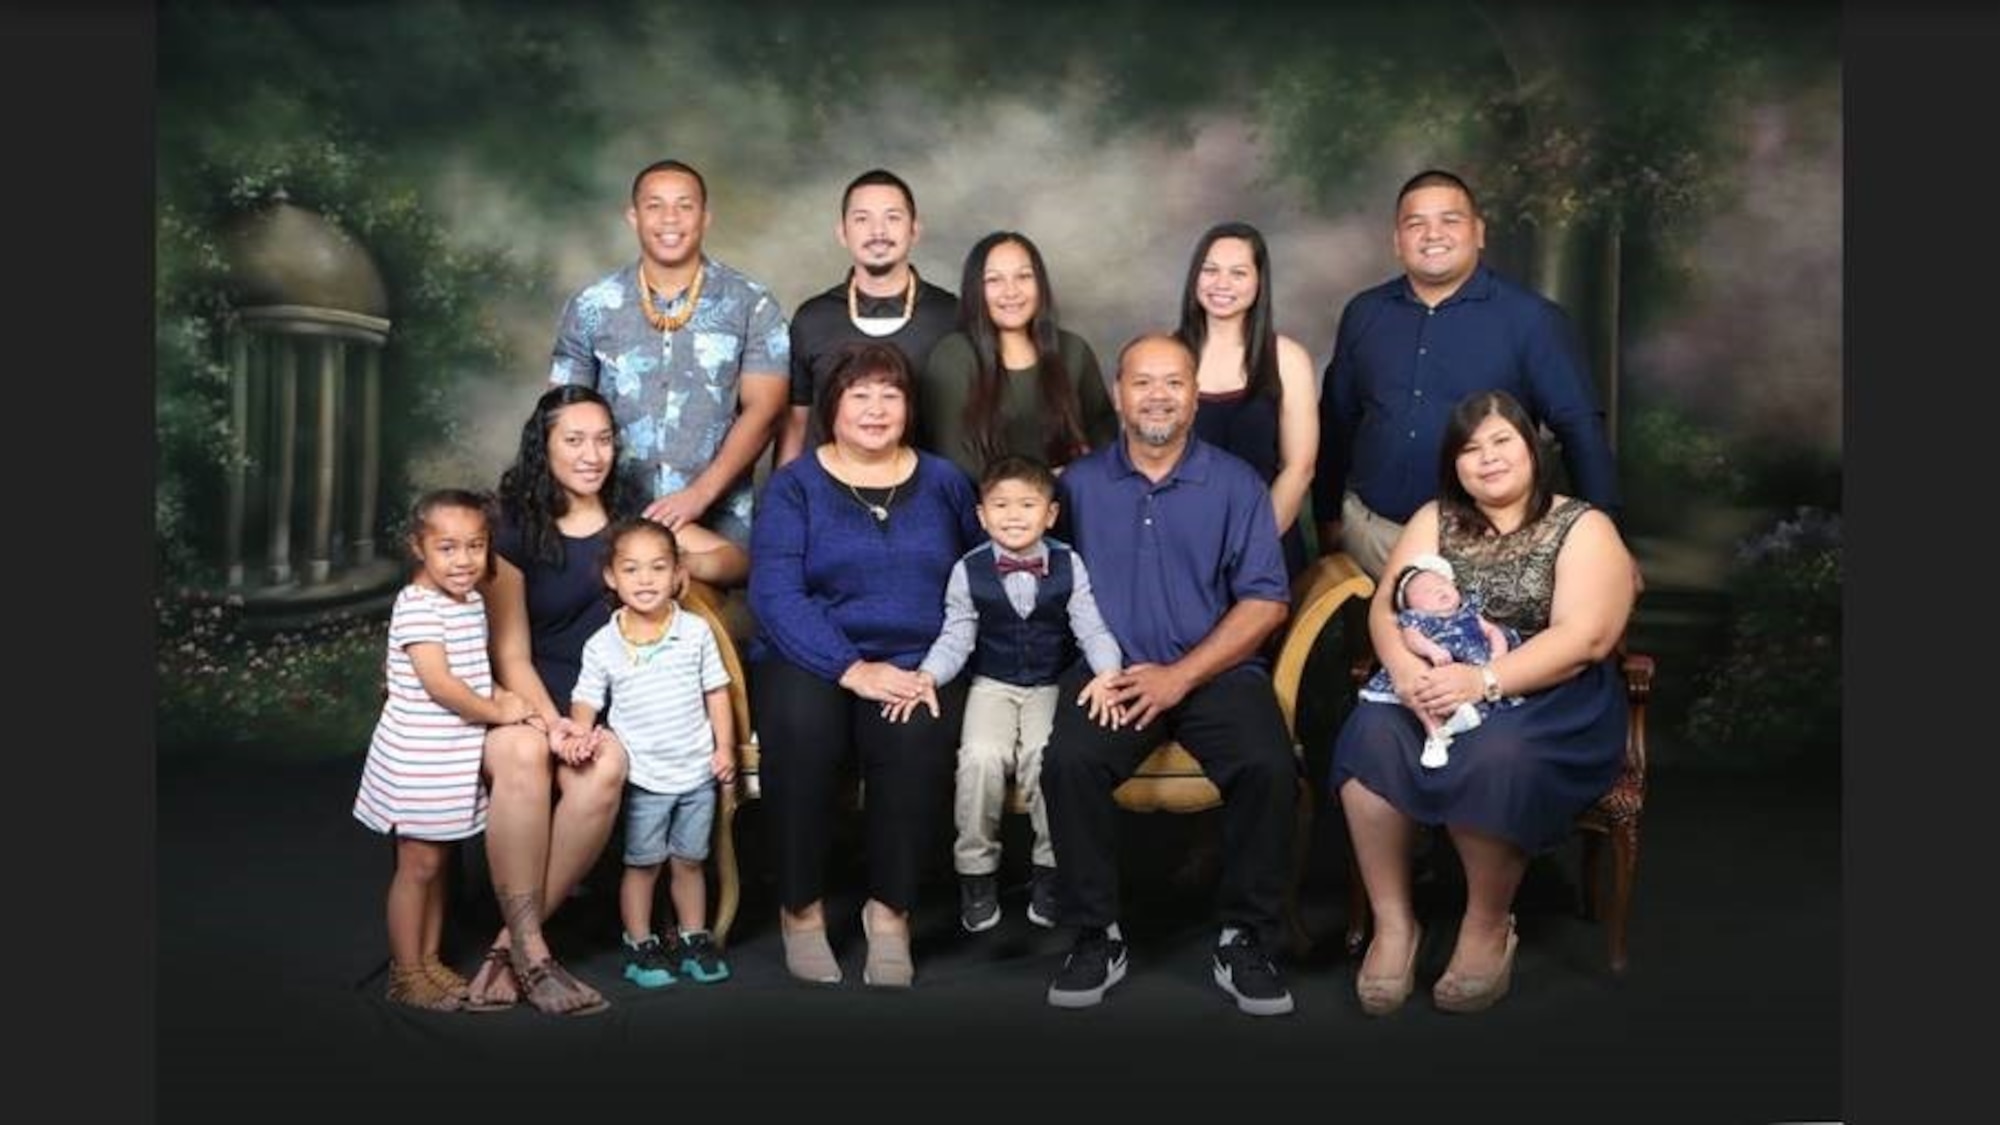 Staff Sgt. Conralyn Manglona, 56th Communications Squadron knowledge management technician, poses for a photo with her family. Manglona and her family are from Tinian, one of the islands of the Commonwealth of the Northern Mariana Islands. Diversity and inclusion in the U.S. Air Force are warfighting imperatives capitalizing on all available talent by enabling a culture where all Airmen are valued and respected for their identity, culture and background. (Courtesy Photo)